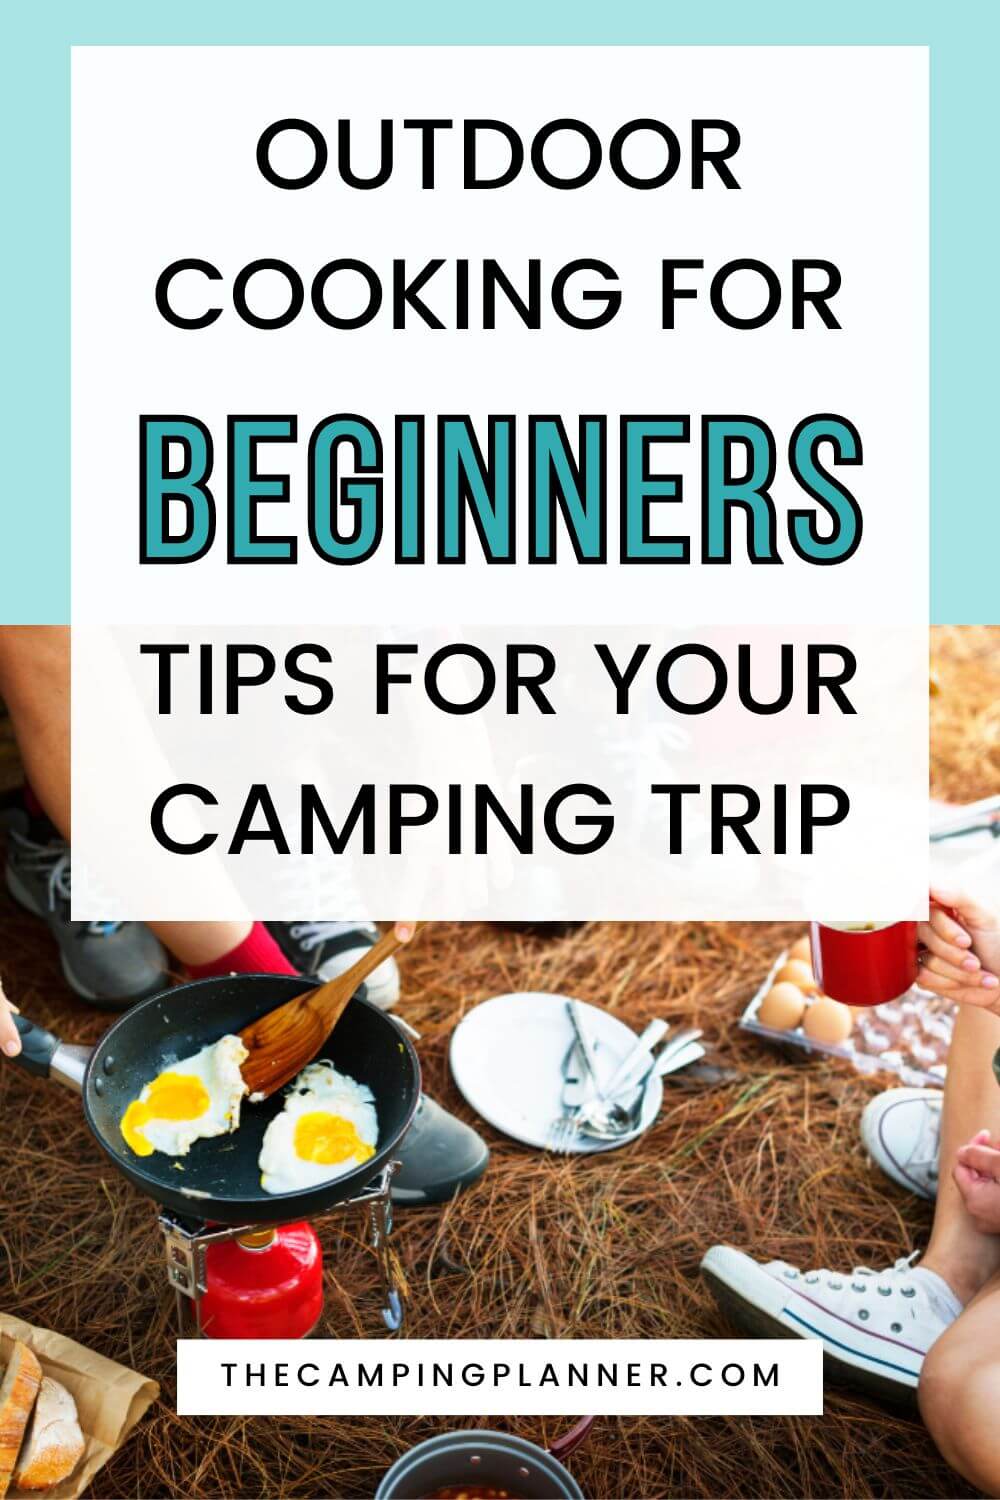 outdoor cooking for beginners tips for your camping trip.